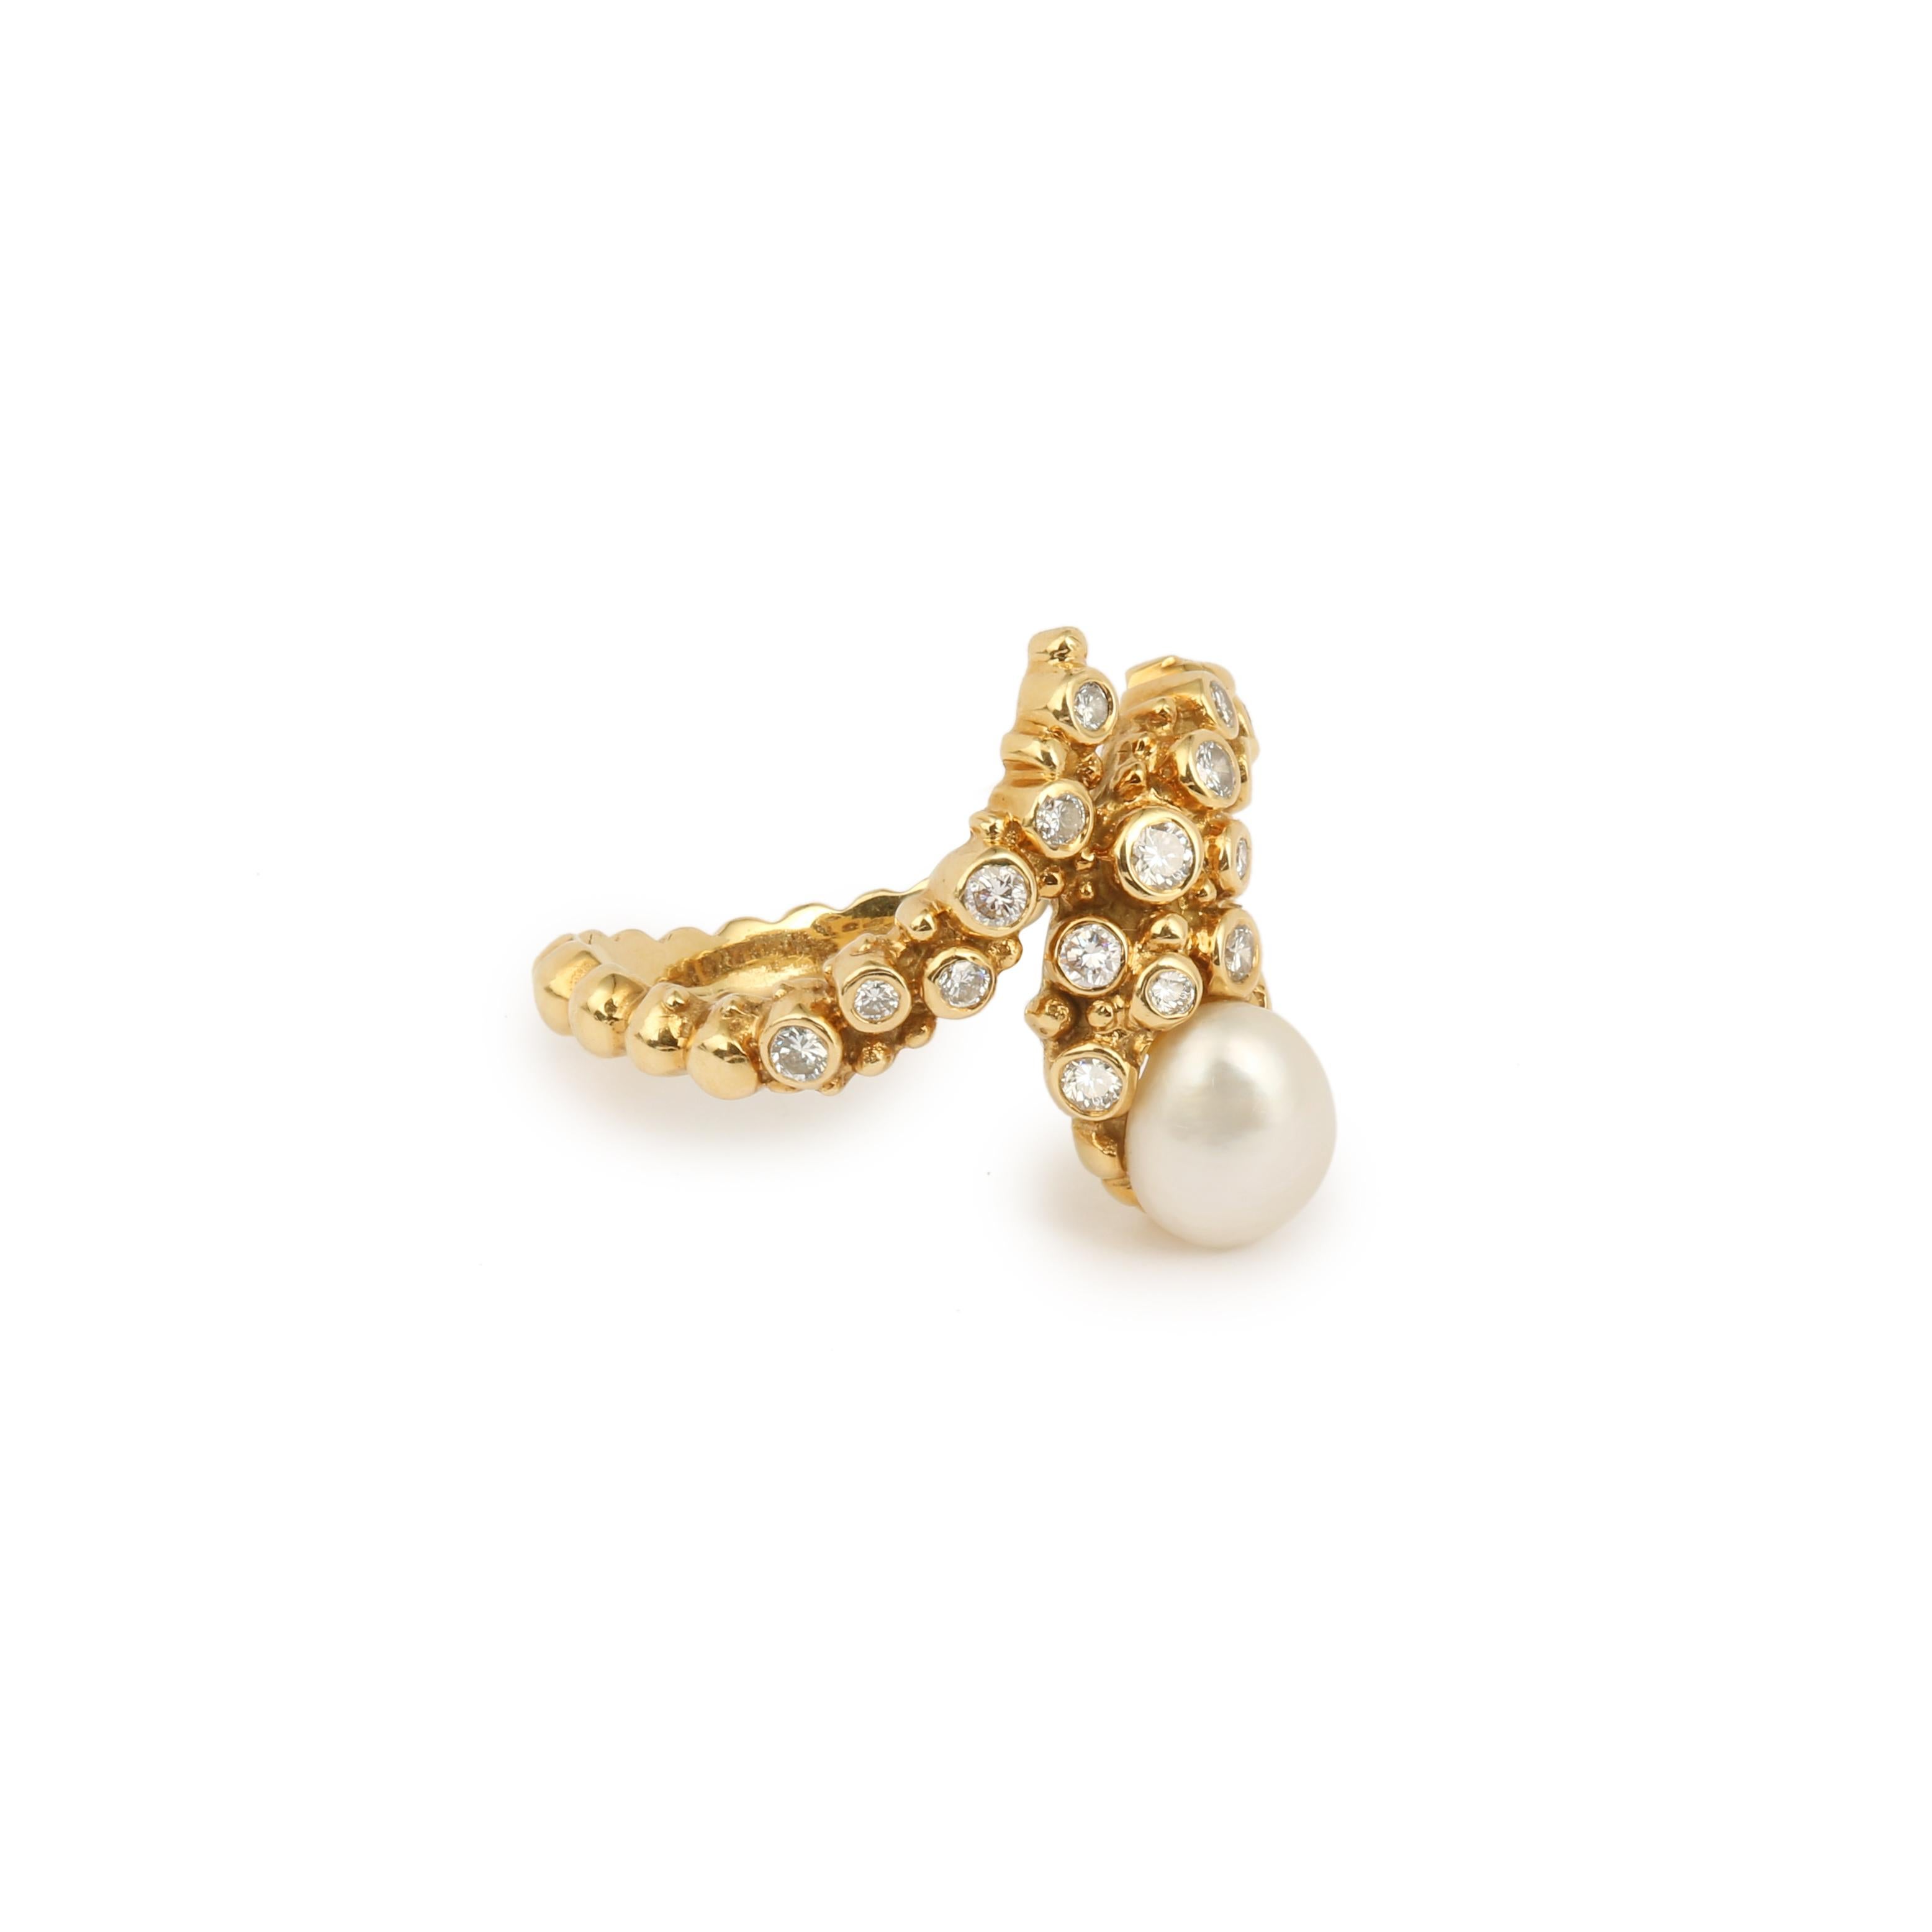 Lovely Gilbert Albert ring in pearled yellow gold depicting a snake set with a baroque pearl and diamonds.

Very beautiful pearled gold work, typical of Gilbert Albert, considered one of the greatest jewelers of the 20th century.

Estimated total